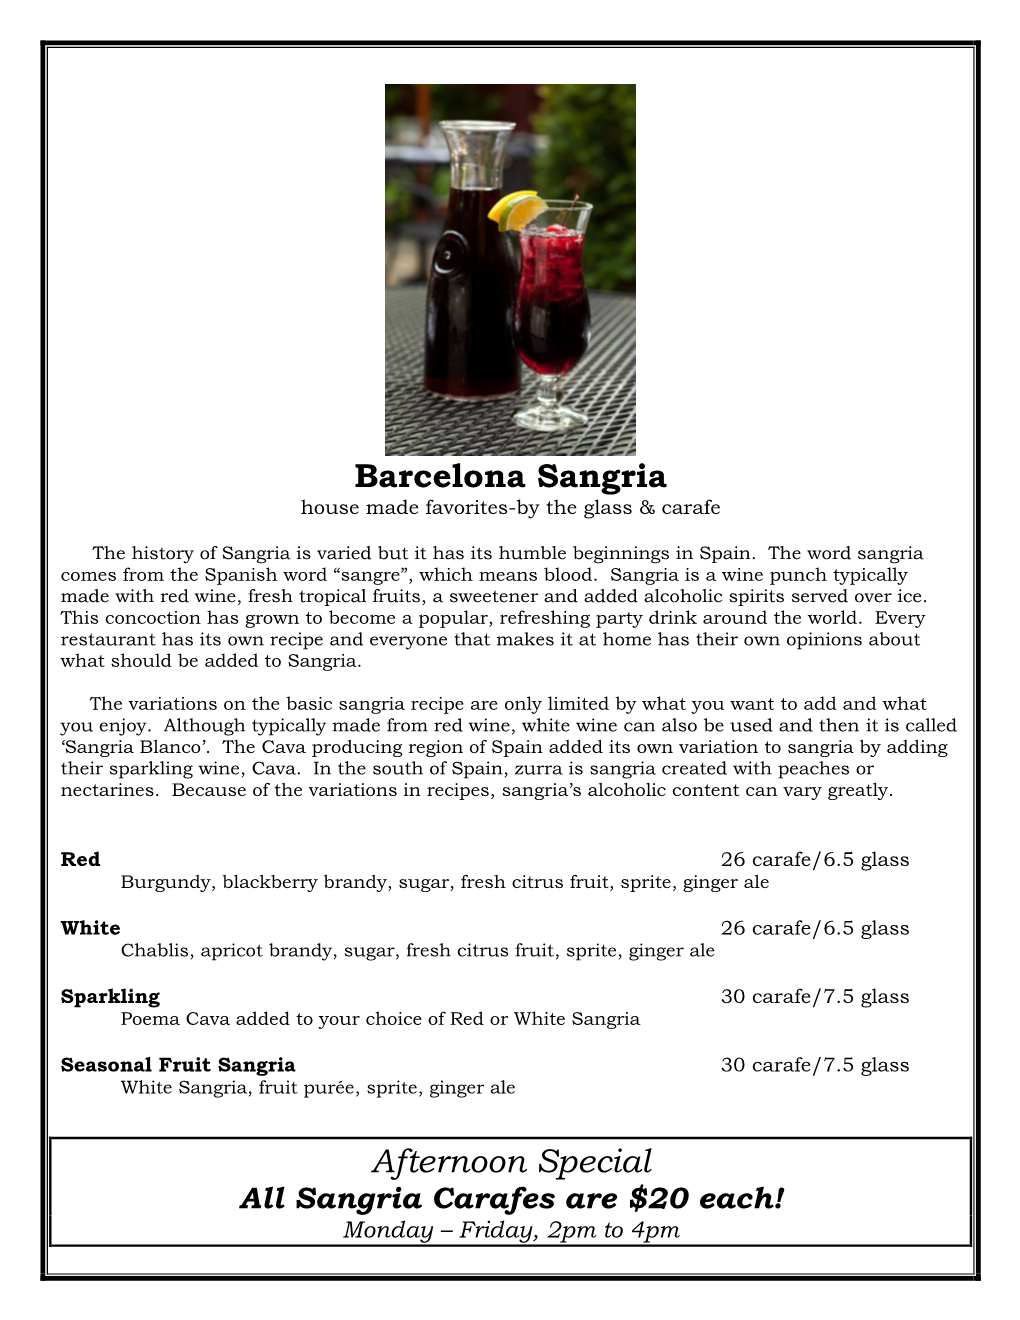 Barcelona Sangria Afternoon Special